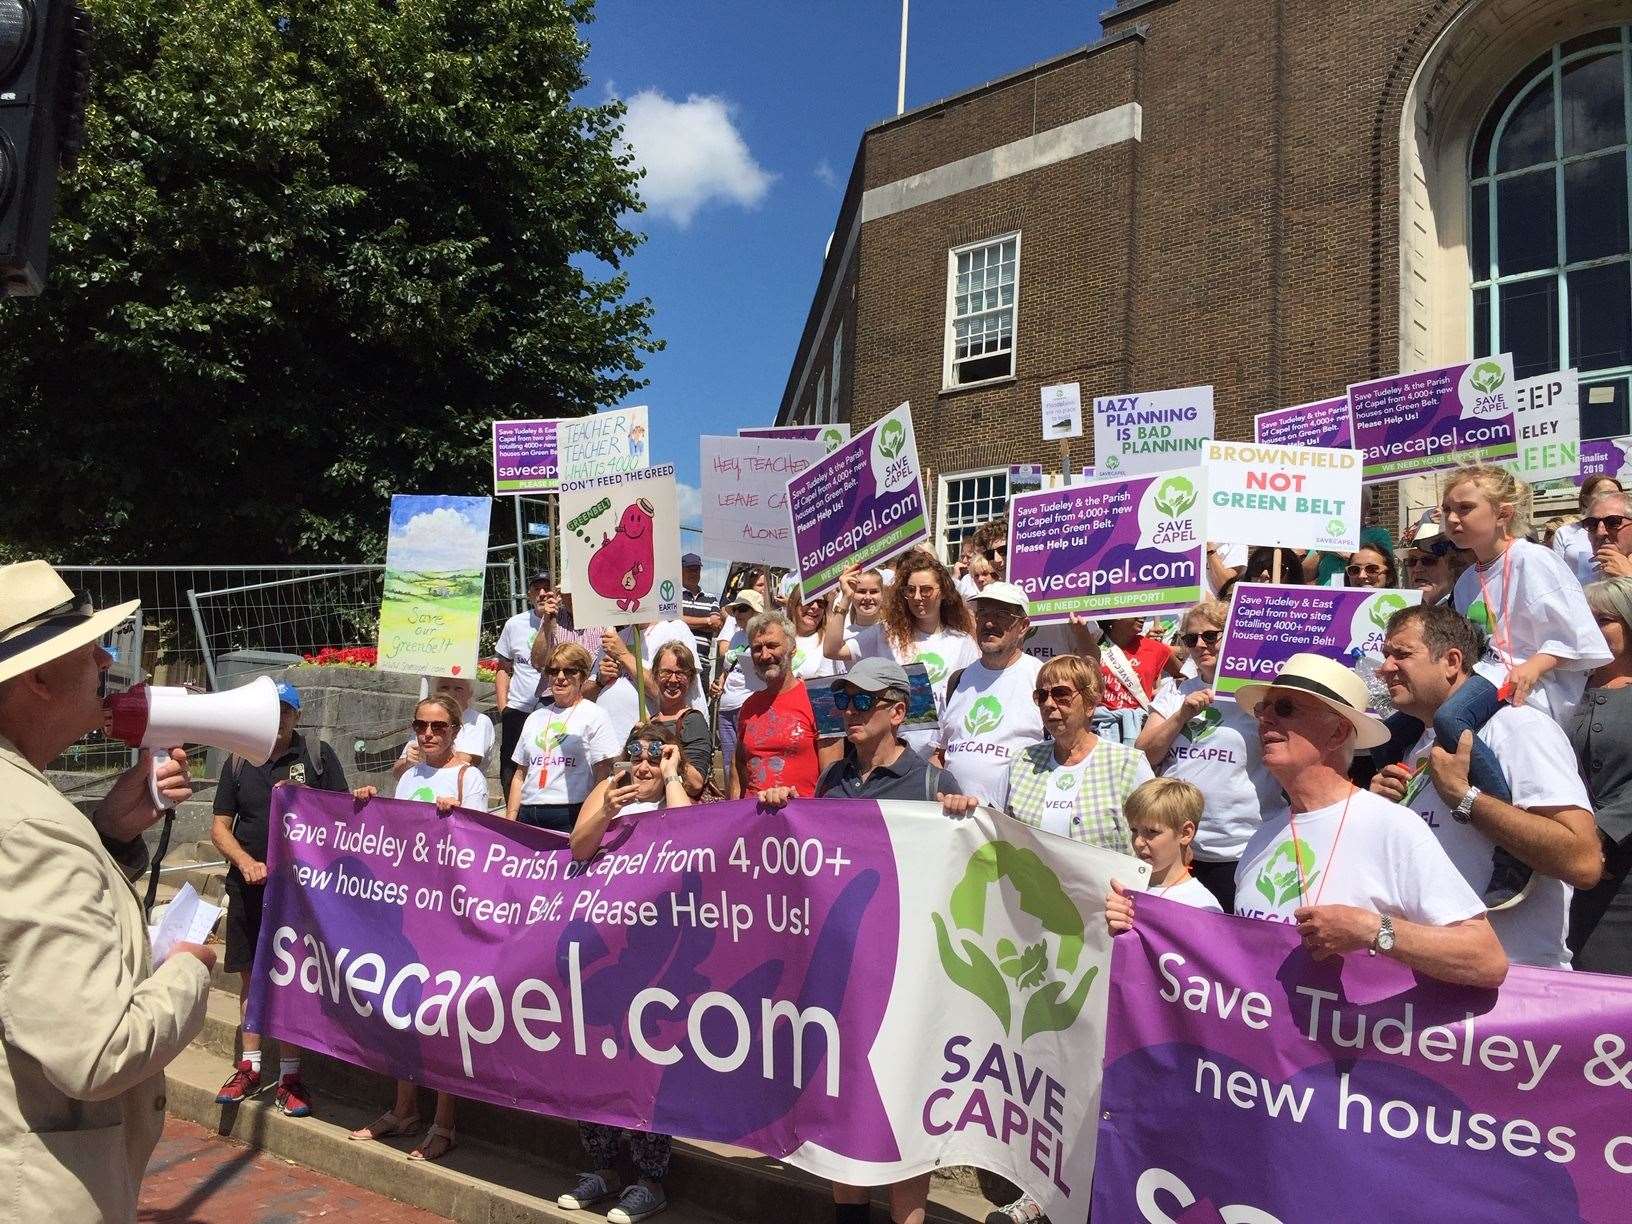 Save Capel held a March on Tunbridge Wells Town Hall in August last year shortly after the proposals were announced